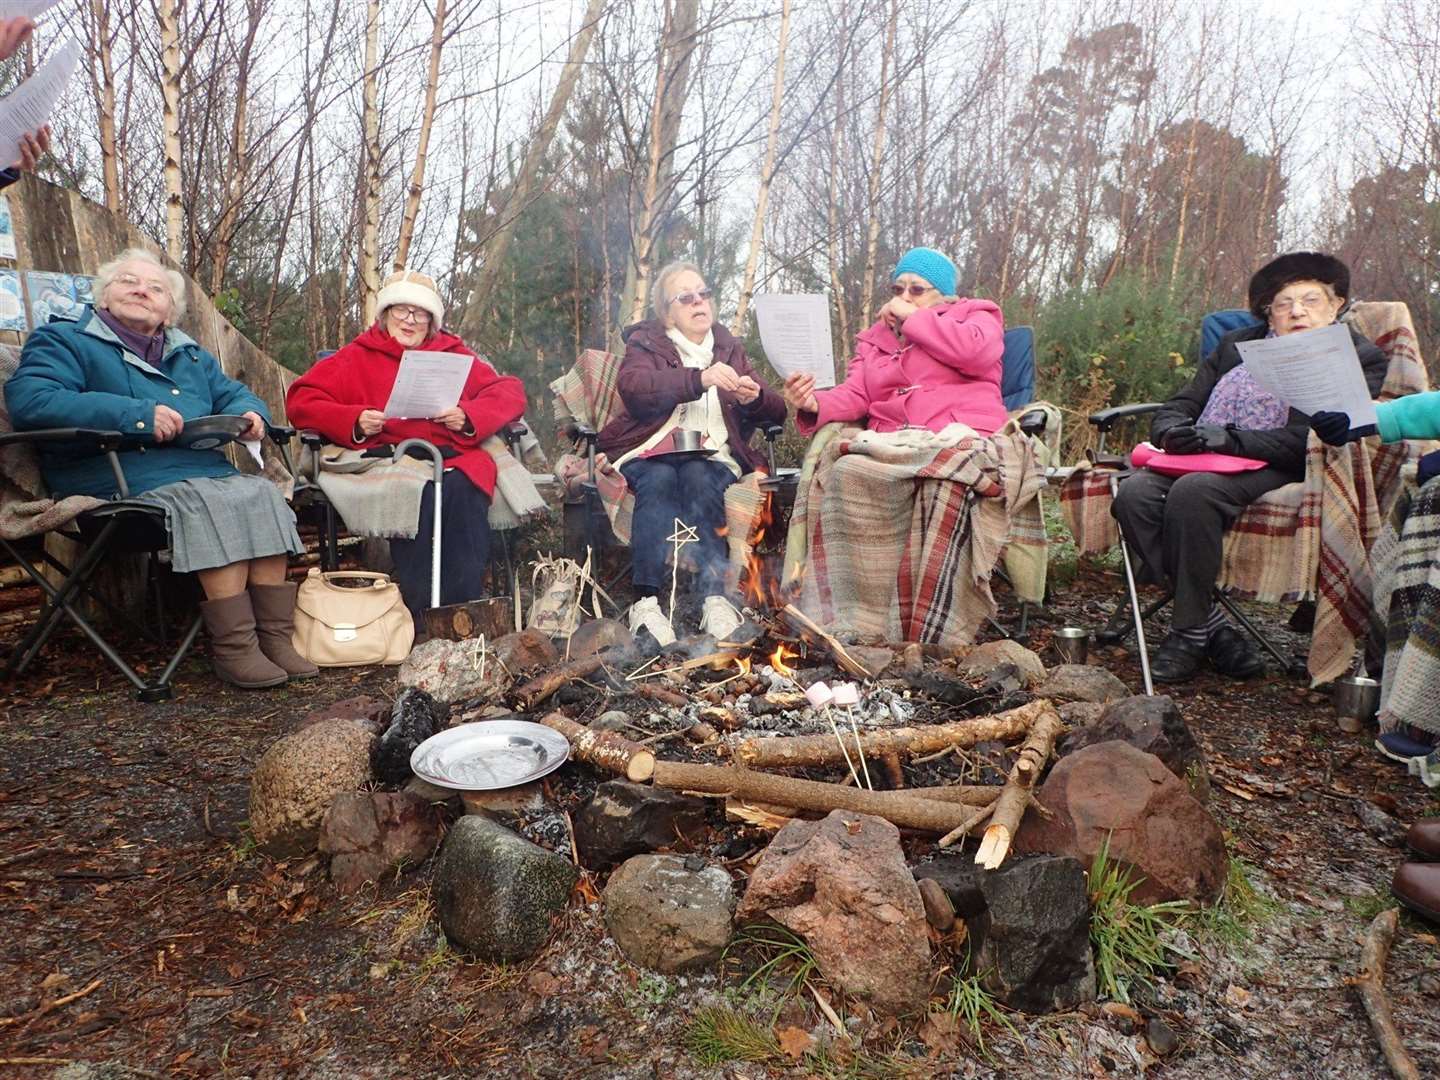 Wild Things! runs Silver Saplings, a holistic wellbeing project for older people.